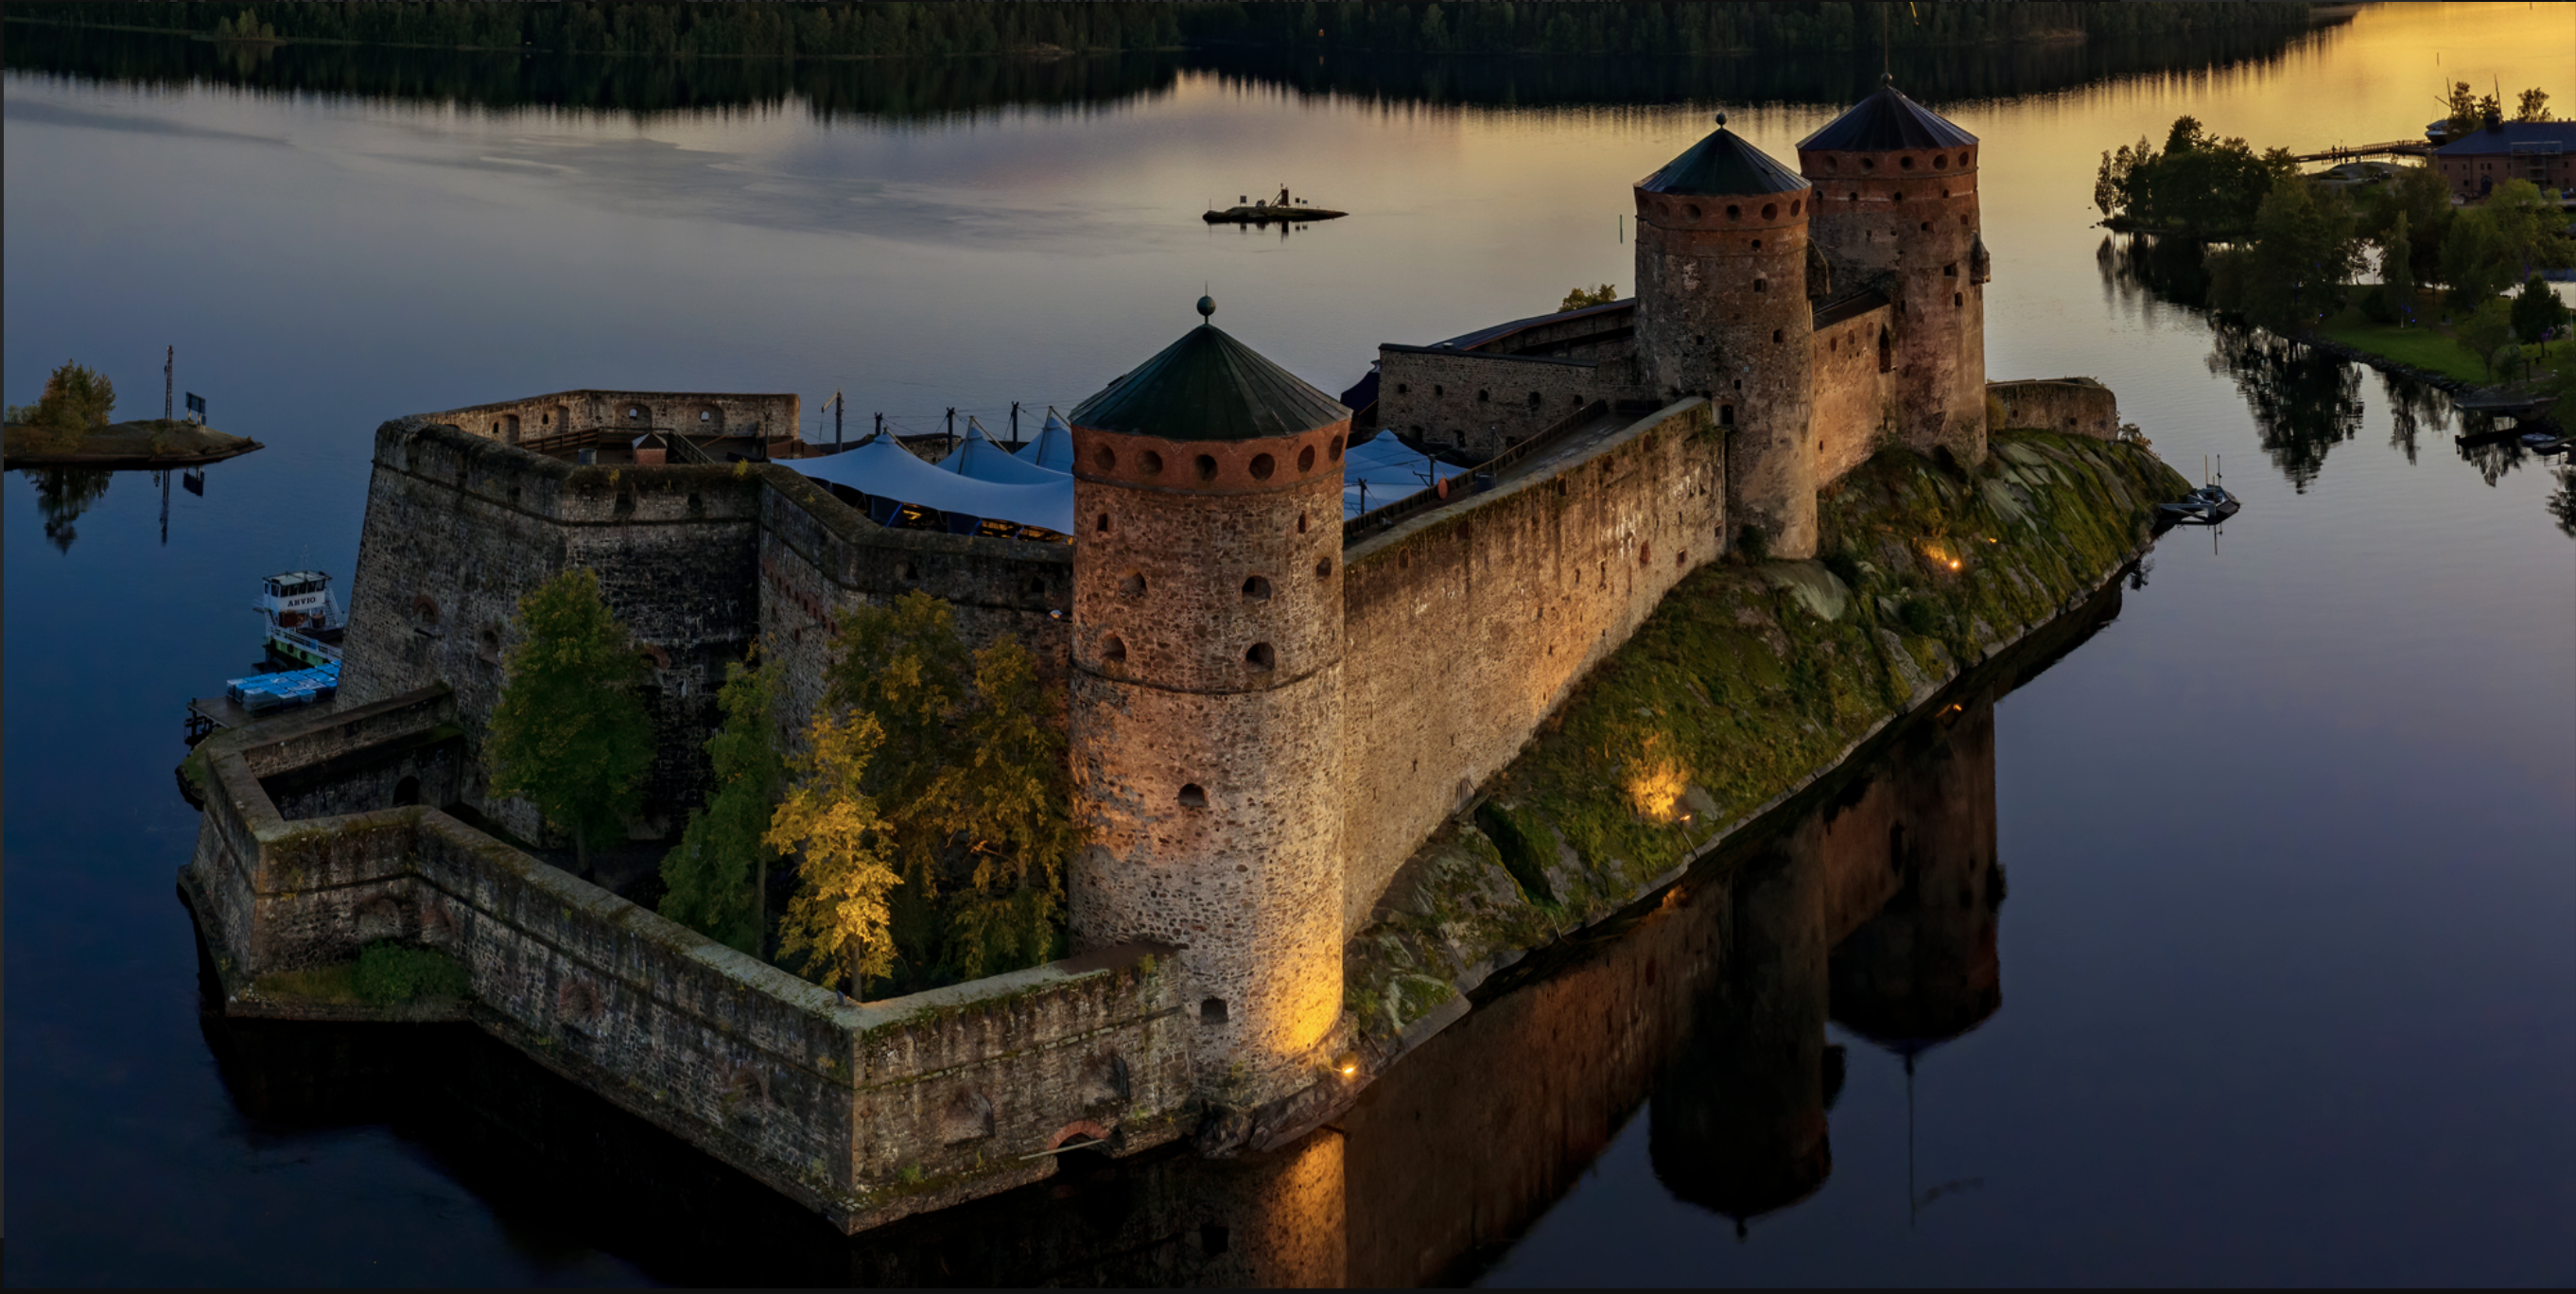 The Olavinlinna Castle is seen at twilight in late summer.